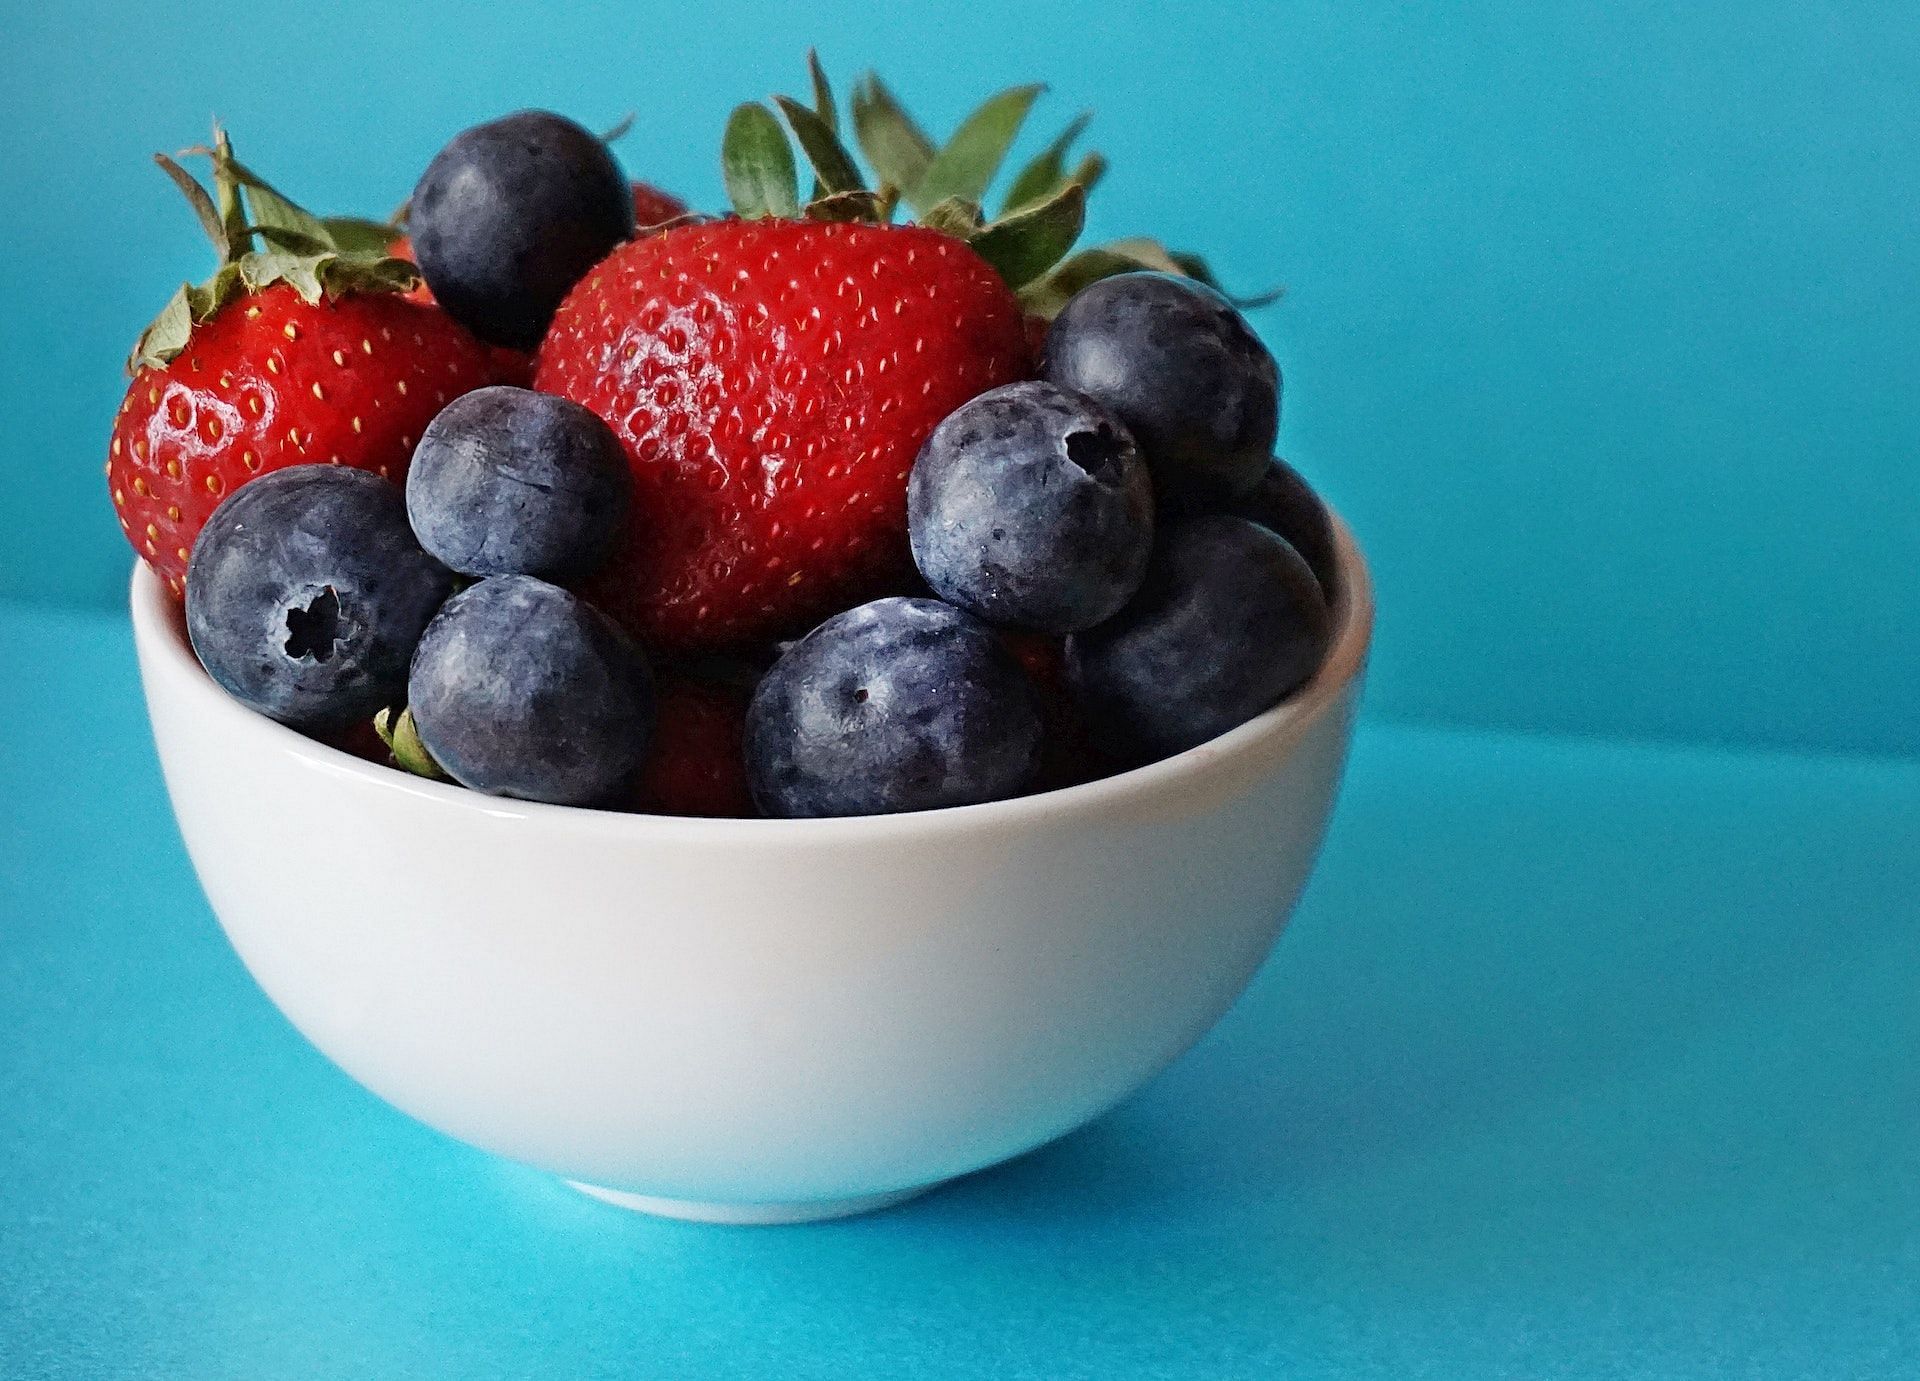 Berries are considered a powerhouse of nutrients. (Photo via Pexels/Suzy Hazelwood)